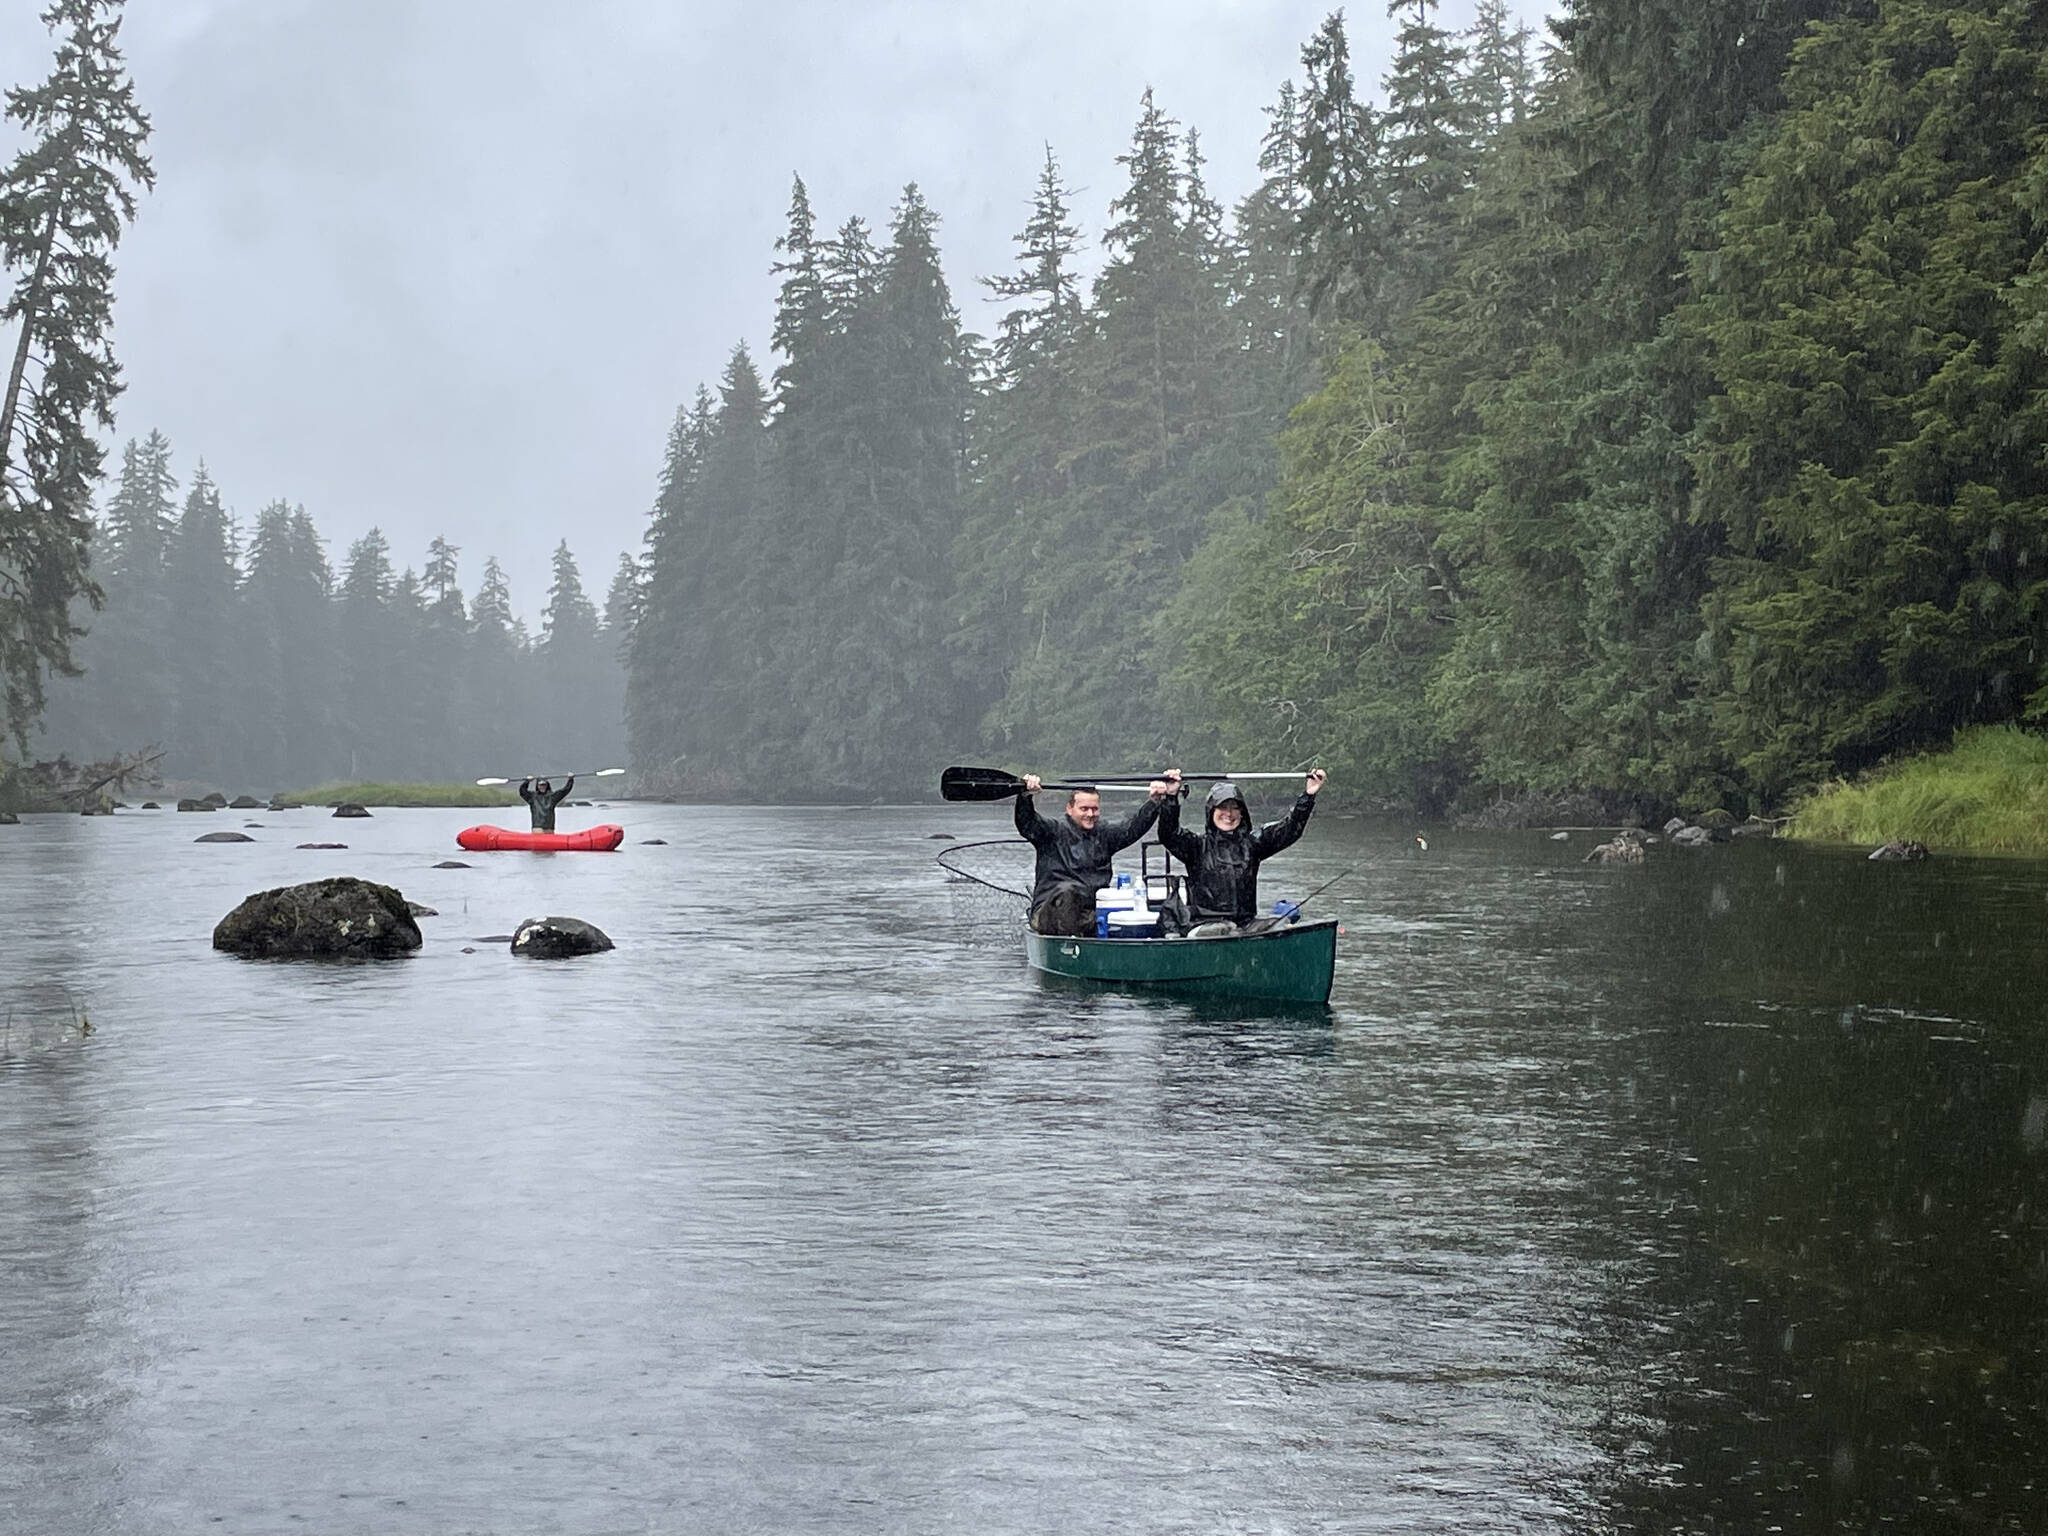 Snow and rain are often annoying, but without the right amounts, rivers become too low for good floats and salmon spawning. (Jeff Lund / For the Juneau Empire)